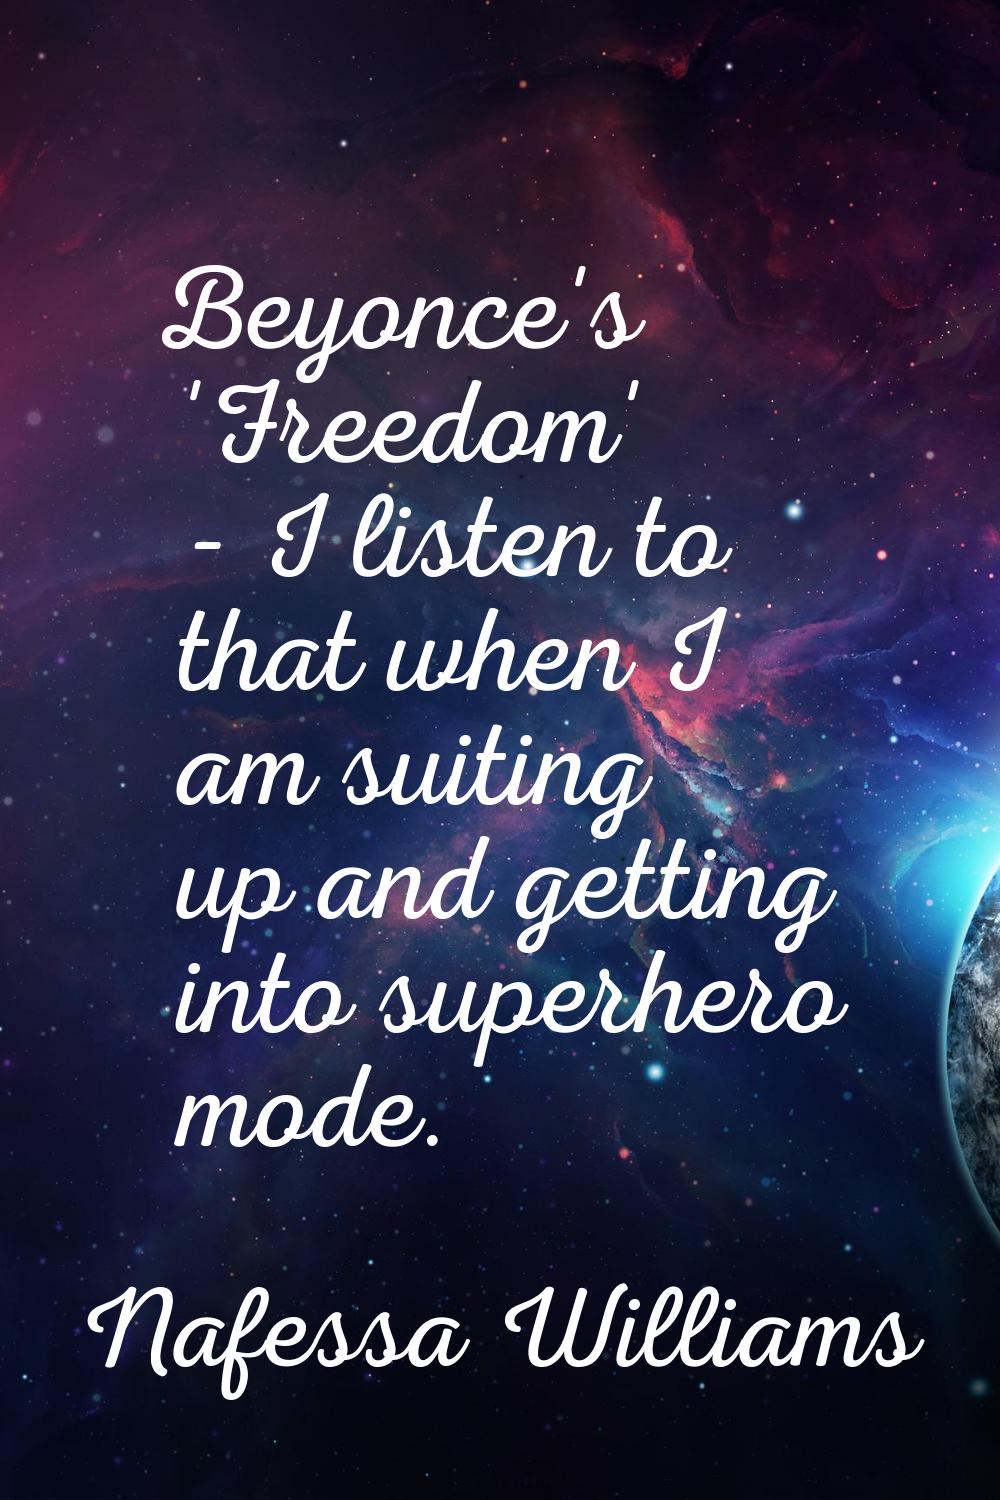 Beyonce's 'Freedom' - I listen to that when I am suiting up and getting into superhero mode.